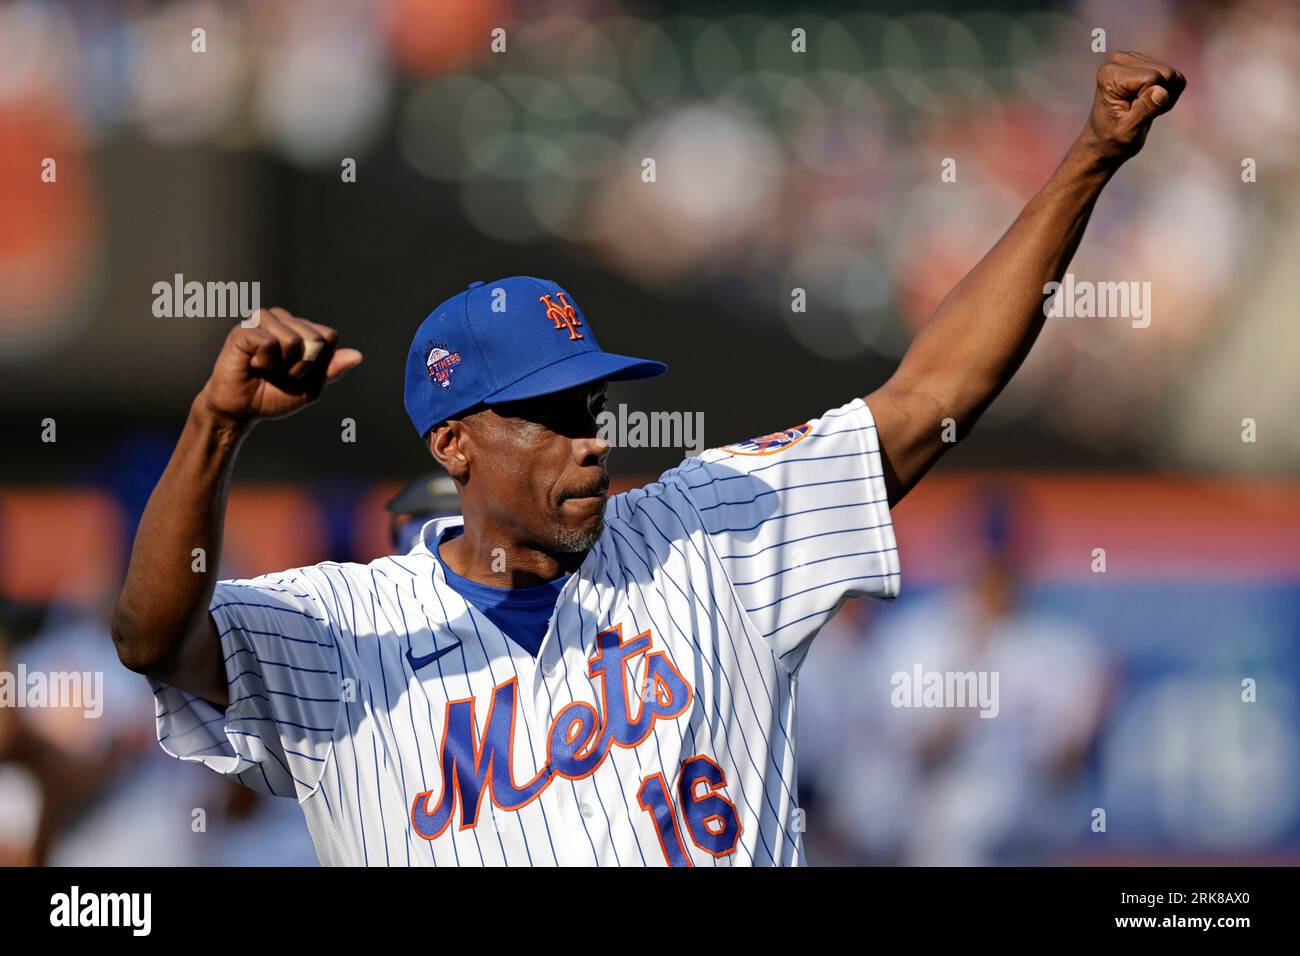 Mets to retire Gooden's No. 16 and Strawberry's No. 18 next season